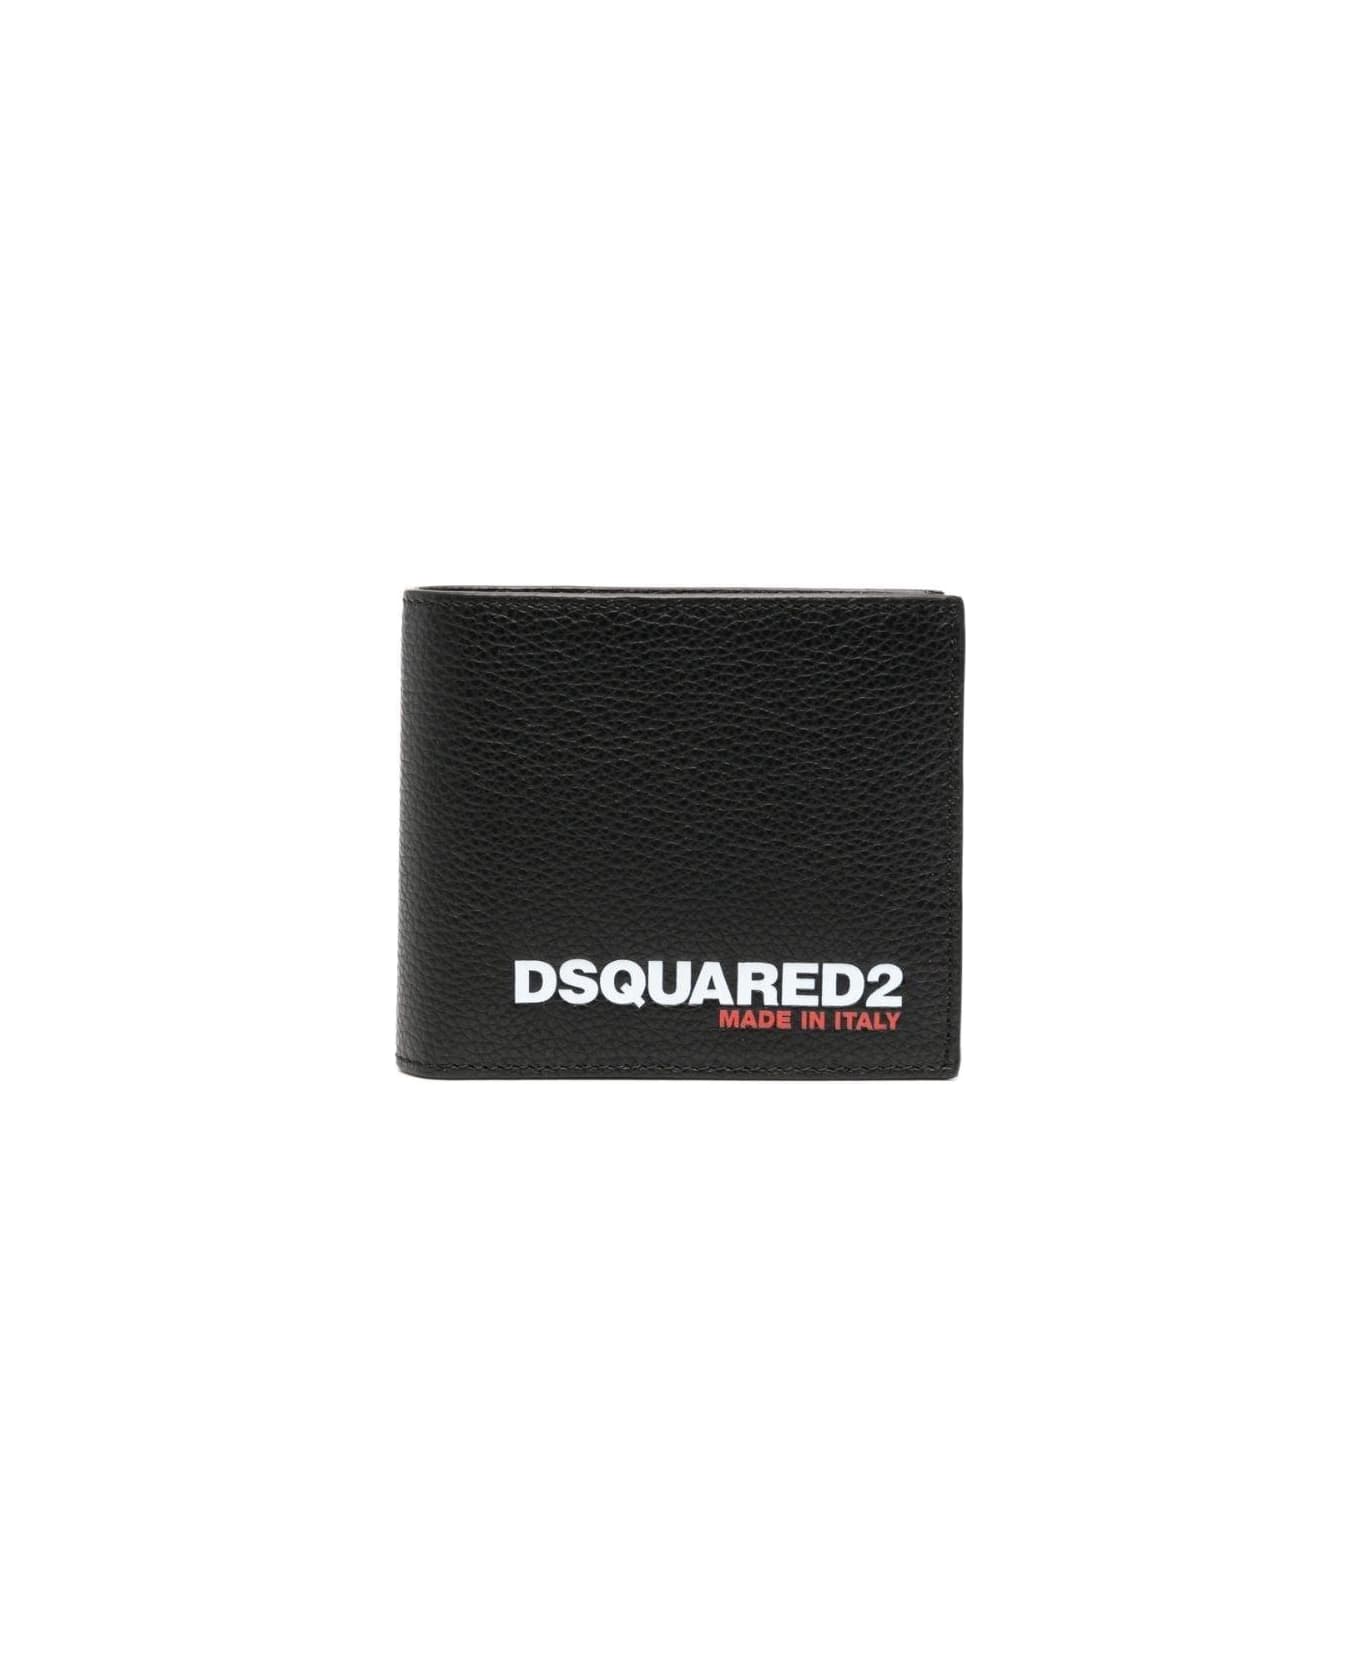 Dsquared2 Leather Wallet